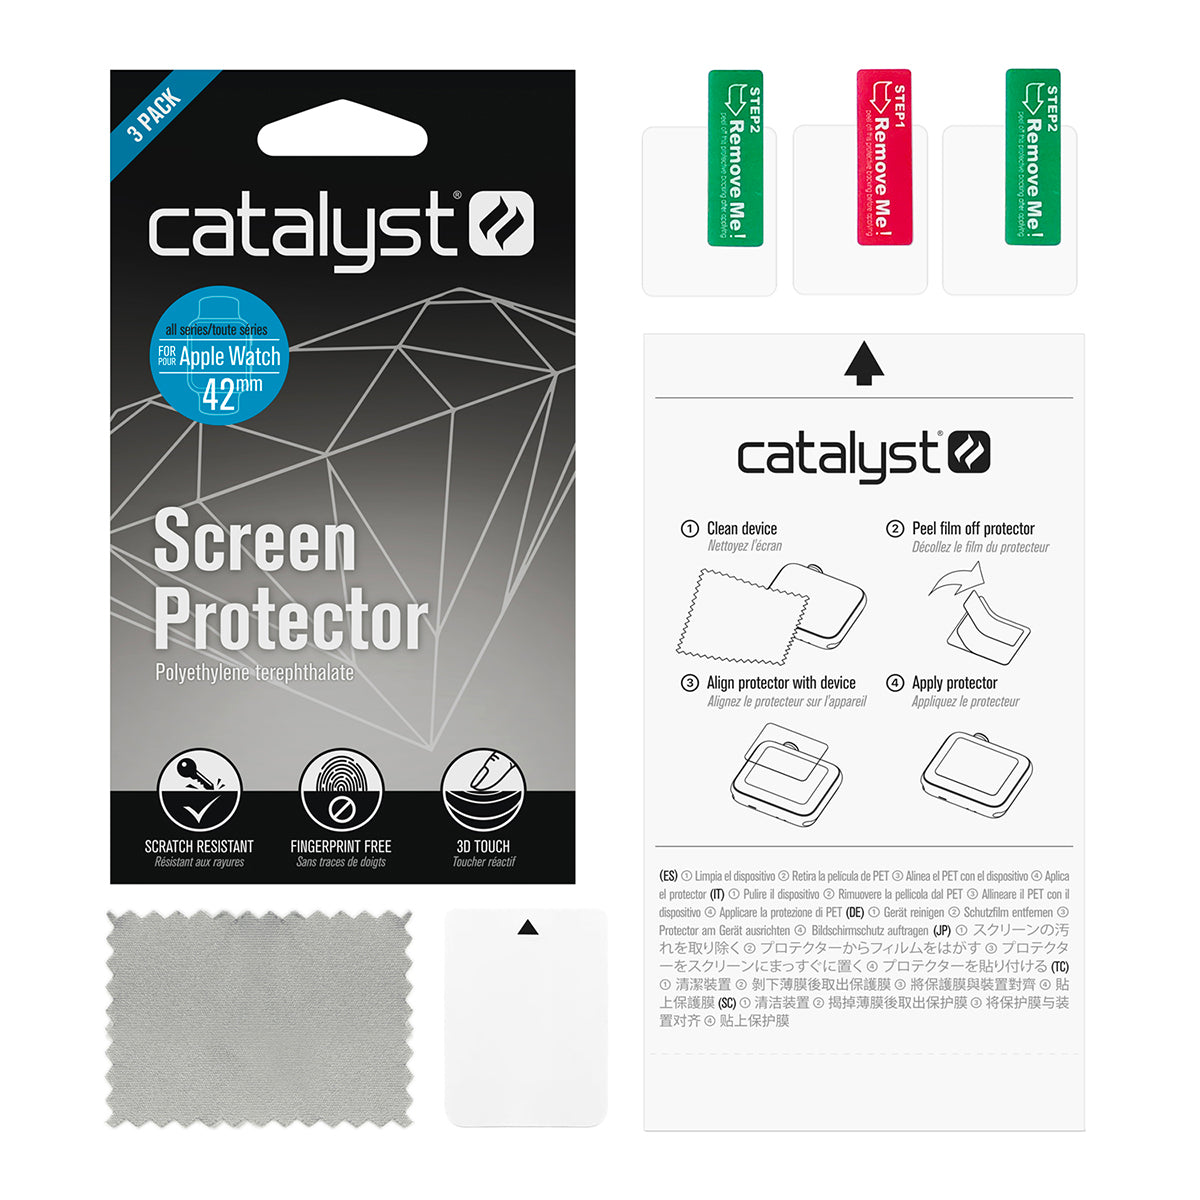 catalyst apple watch series 3 42mm waterproof case band showing the packaging of the screen protector for apple watch microfiber cloth user manual screen protector